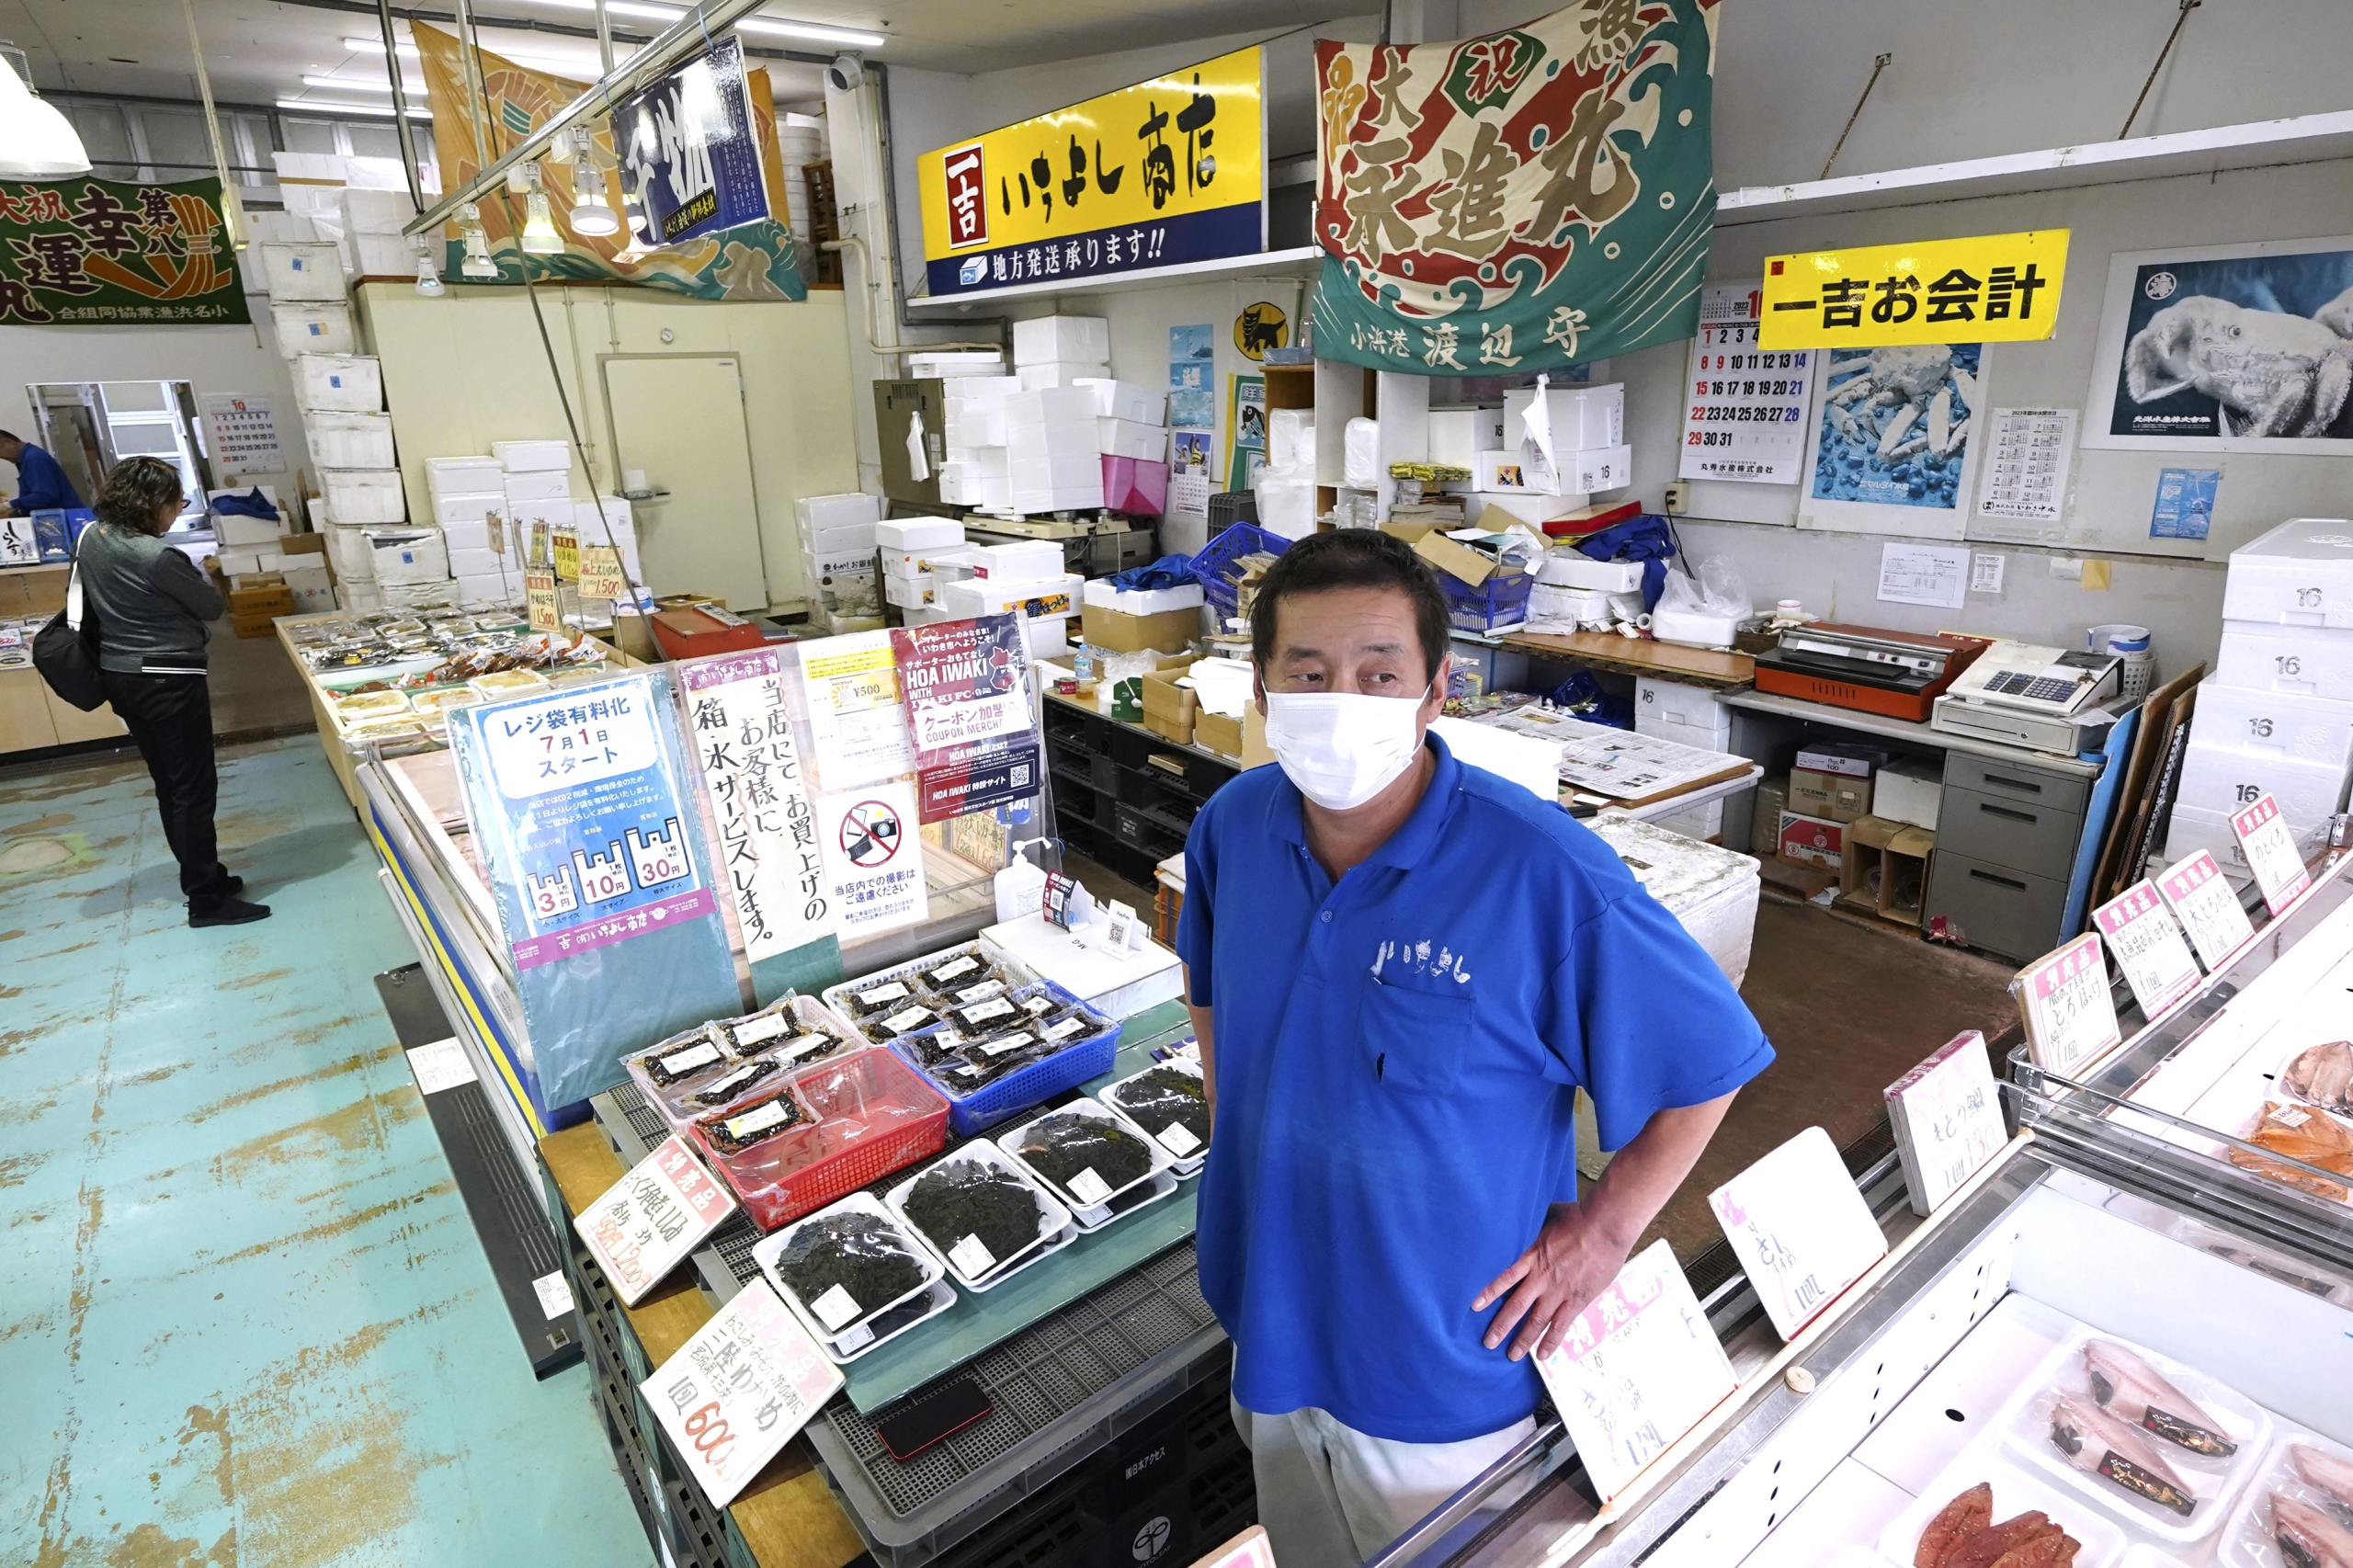 Ichiyoshi fish store manager Hiroharu Haga speaks during an interview with The Associated Press at the seafood market 